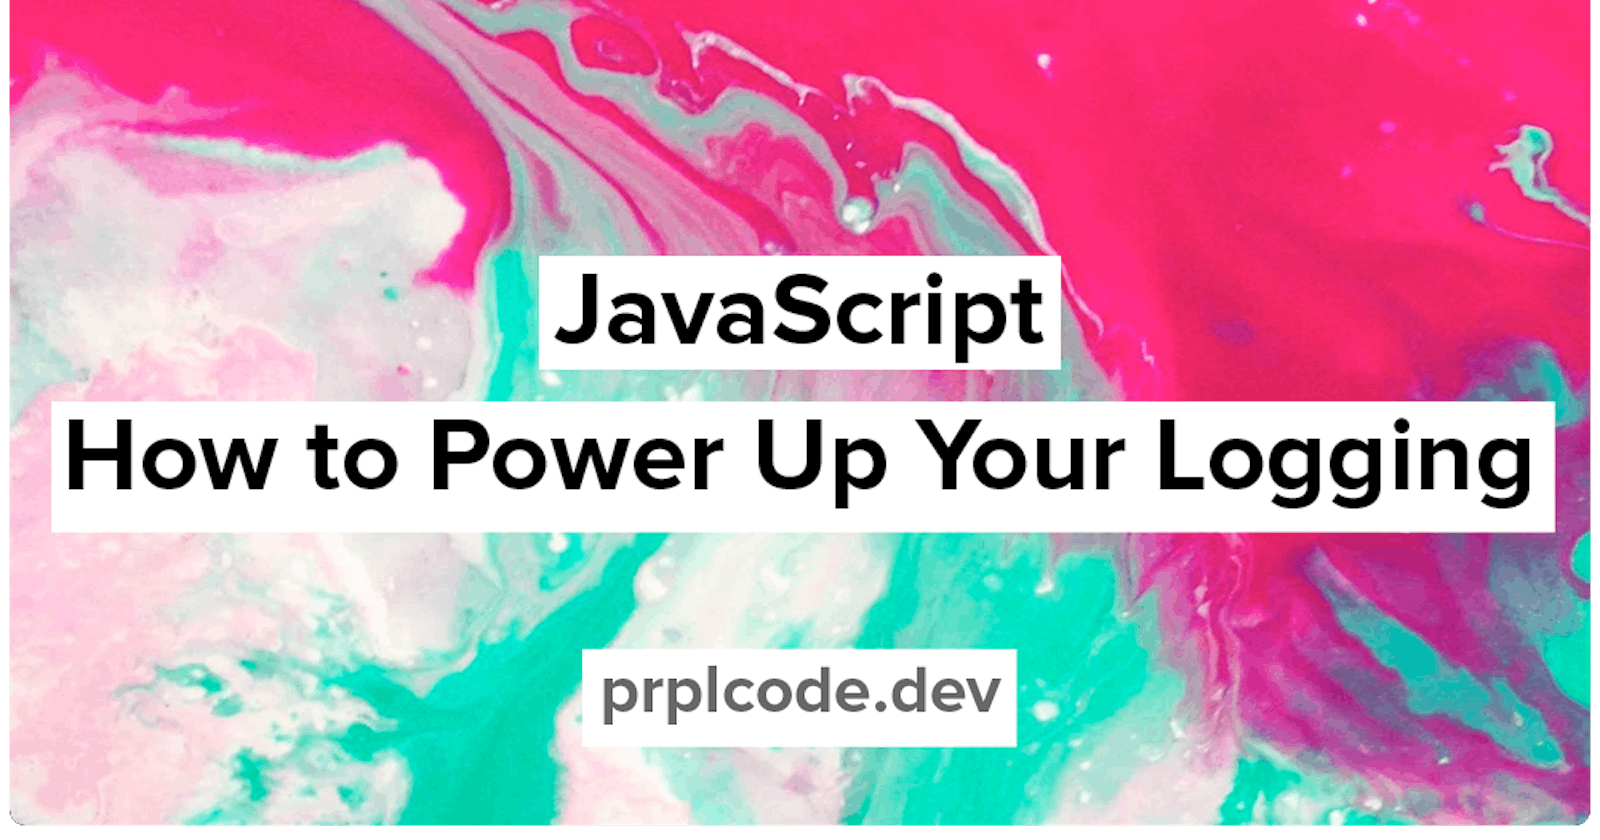 JavaScript: How to Power Up Your Logging